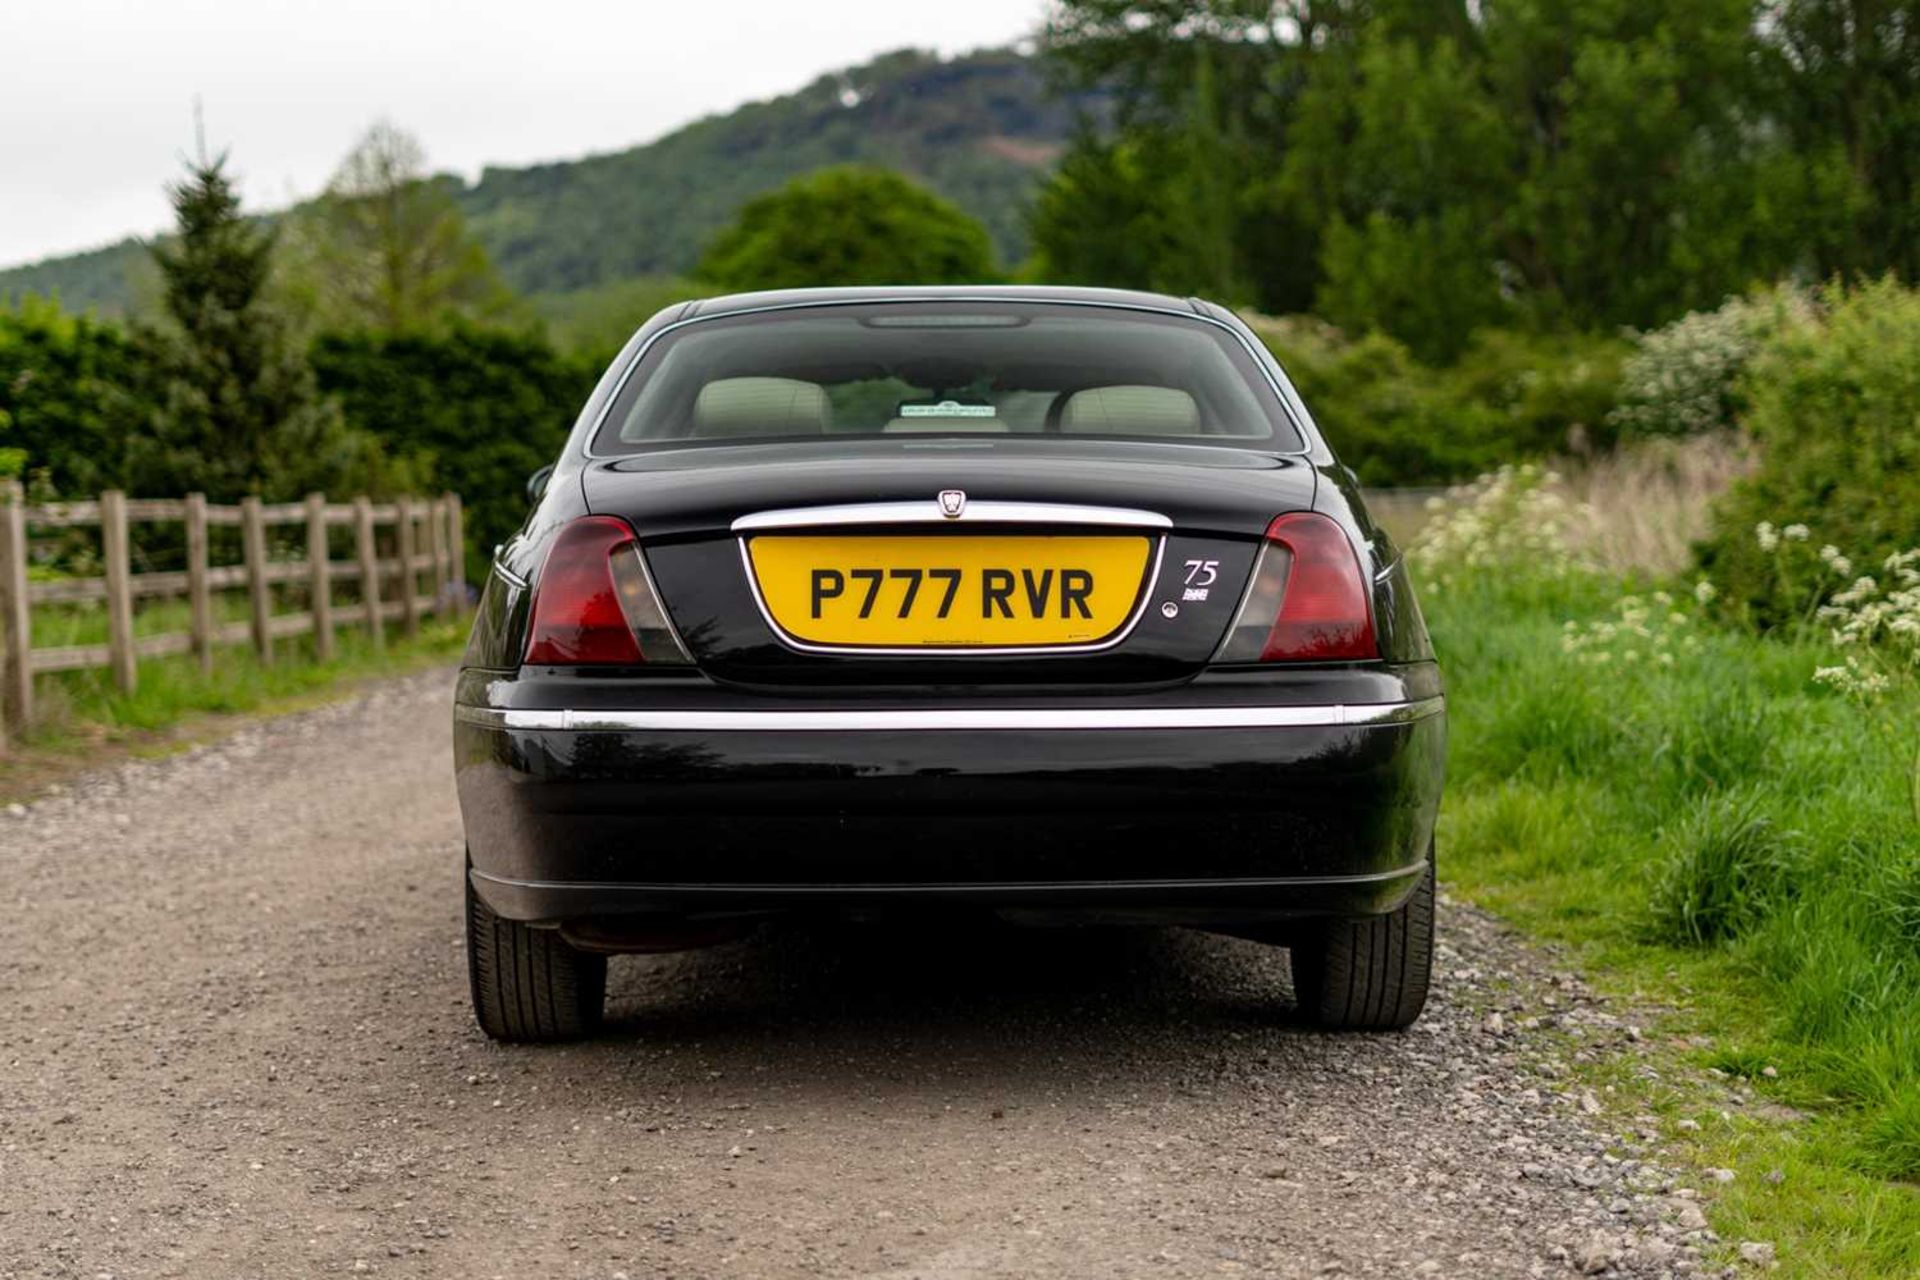 2003 Rover 75 Connoisseur ***NO RESERVE*** Long wheelbase specification  - Image 9 of 58